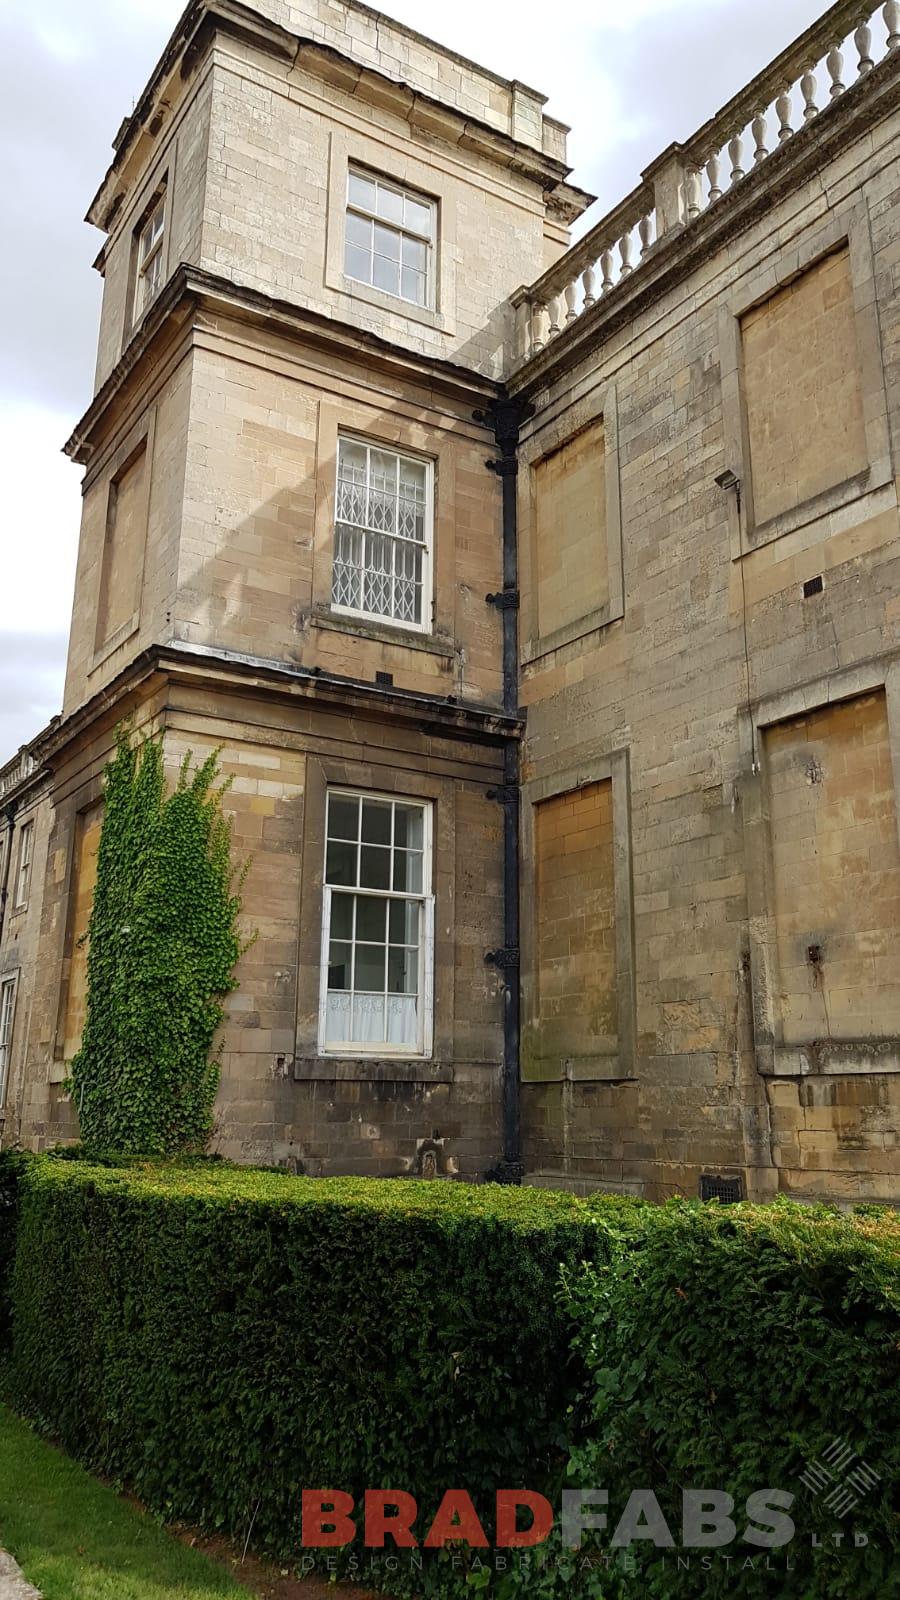 Before Bradfabs LTD UK added the straight fire escape to the beautiful stately home 